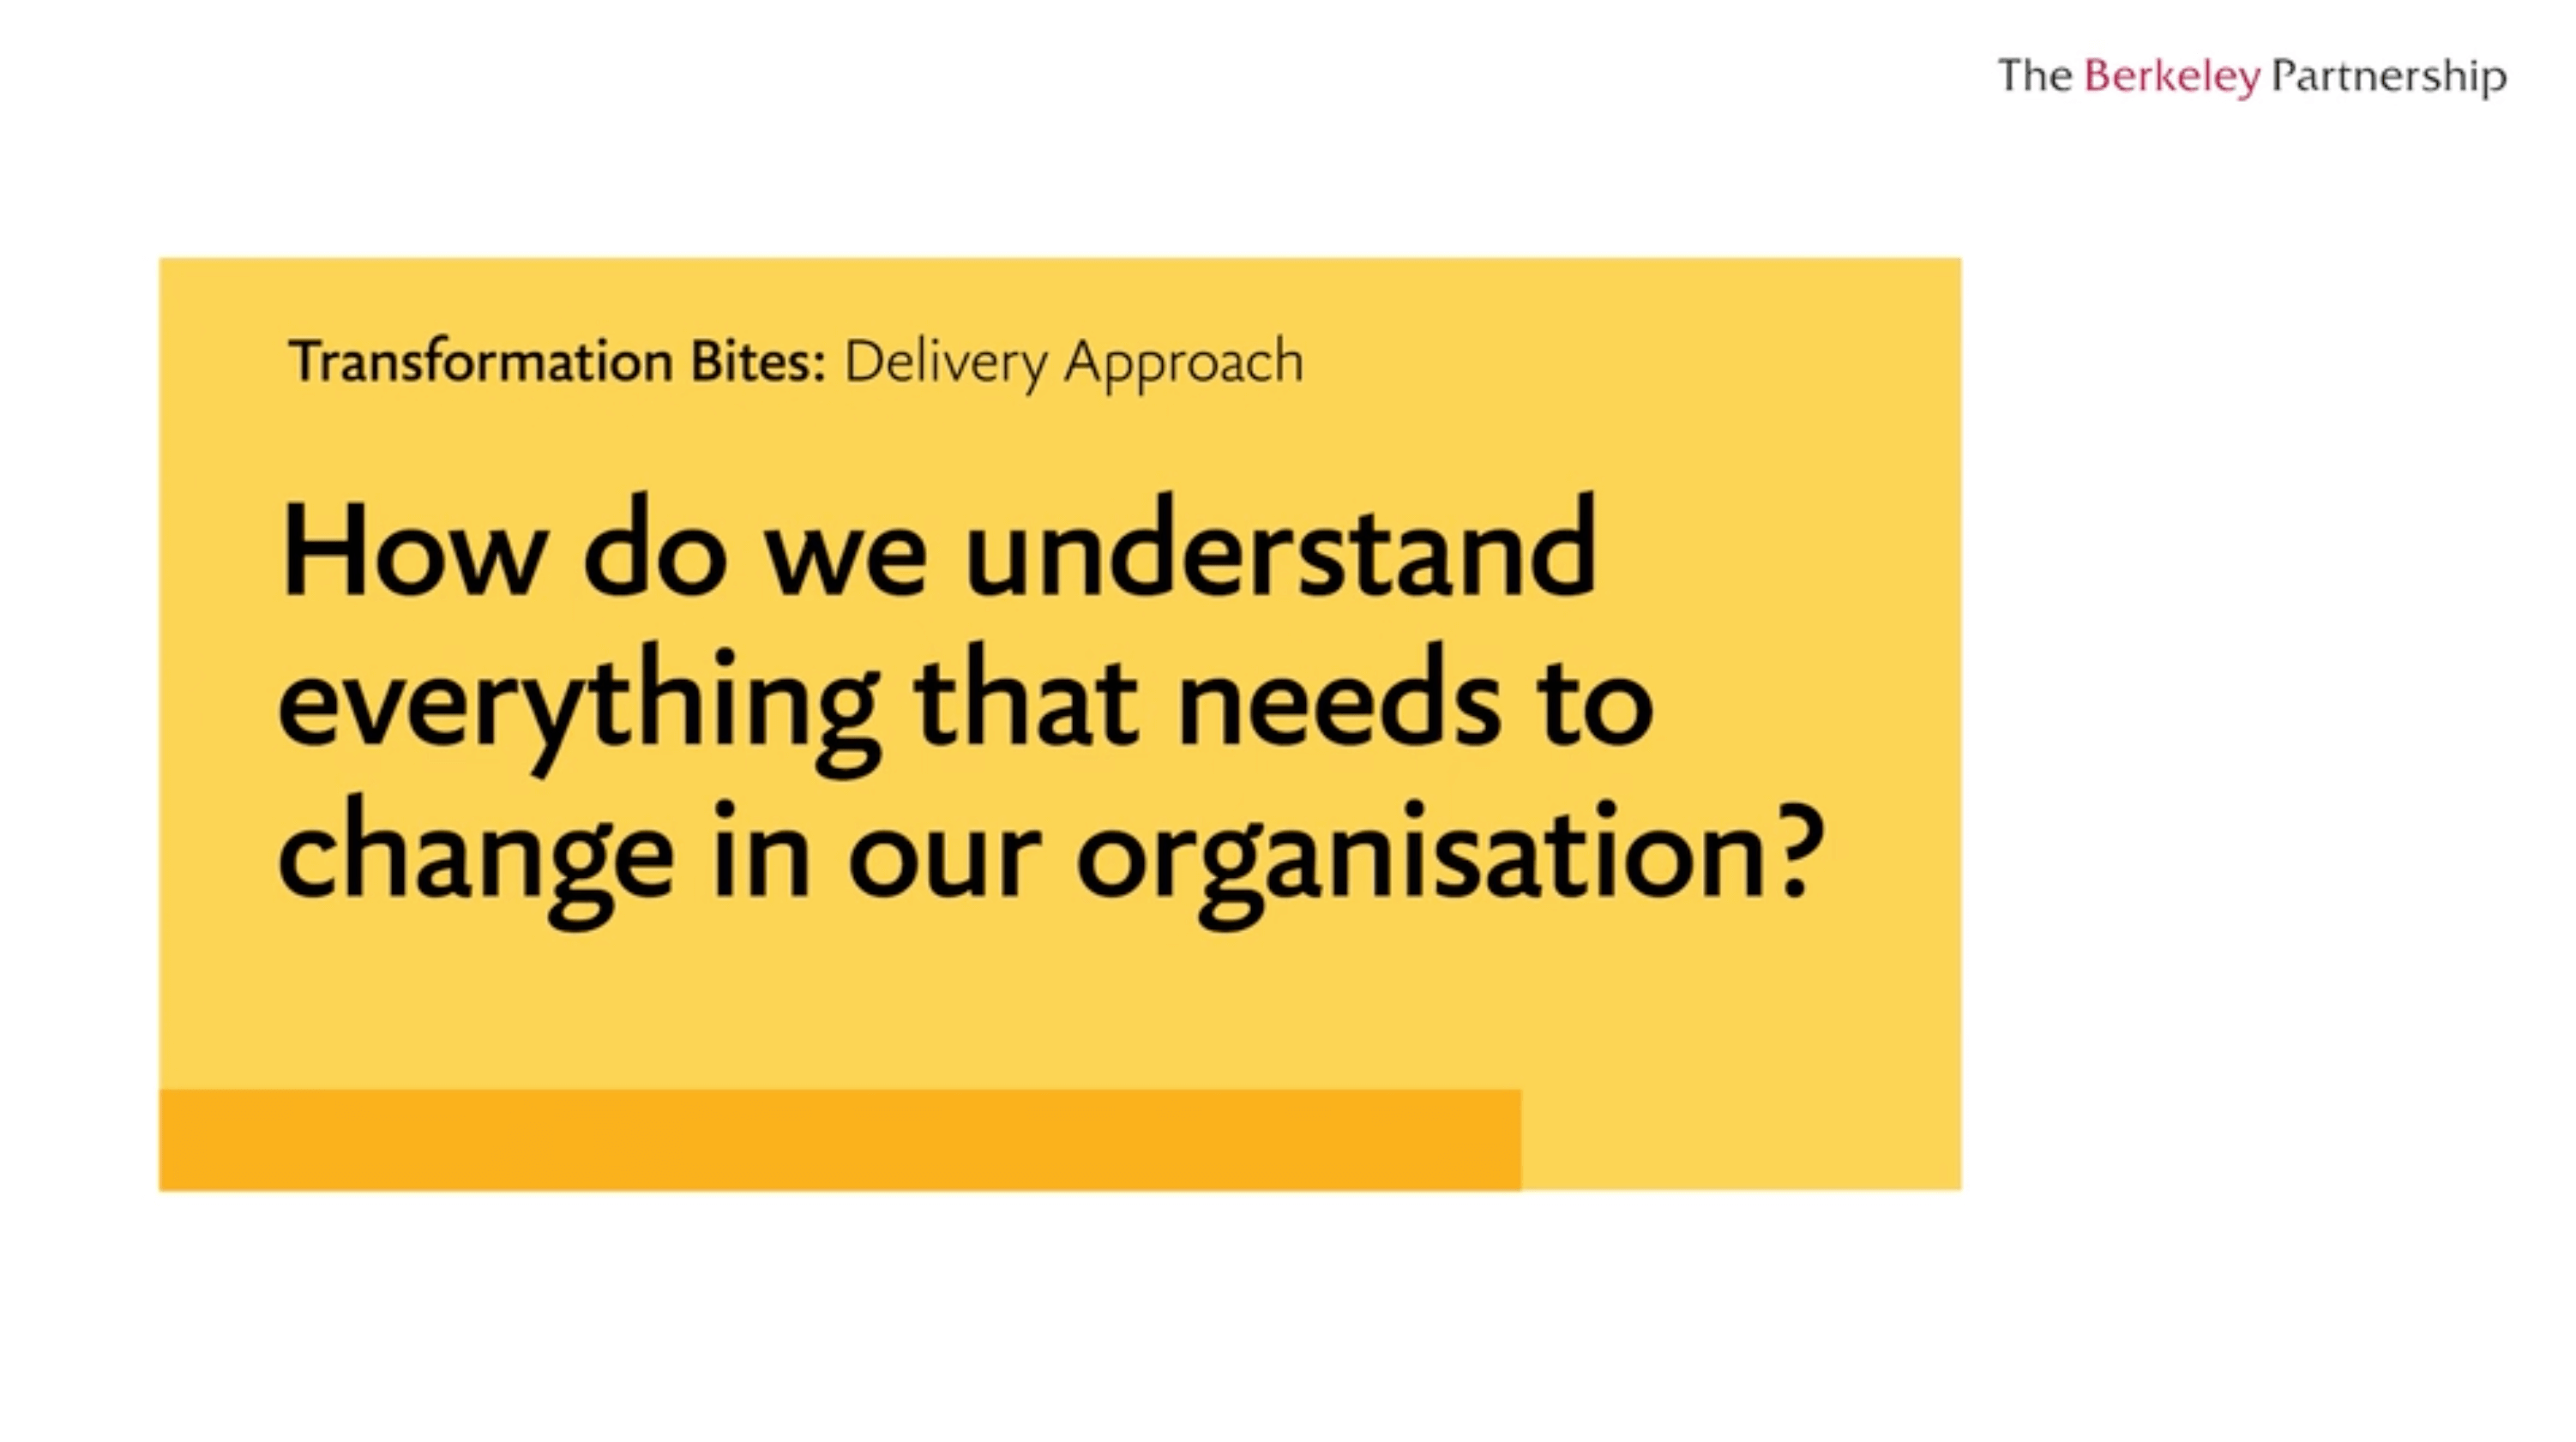 How do we understand everything that needs to change in our organisation?